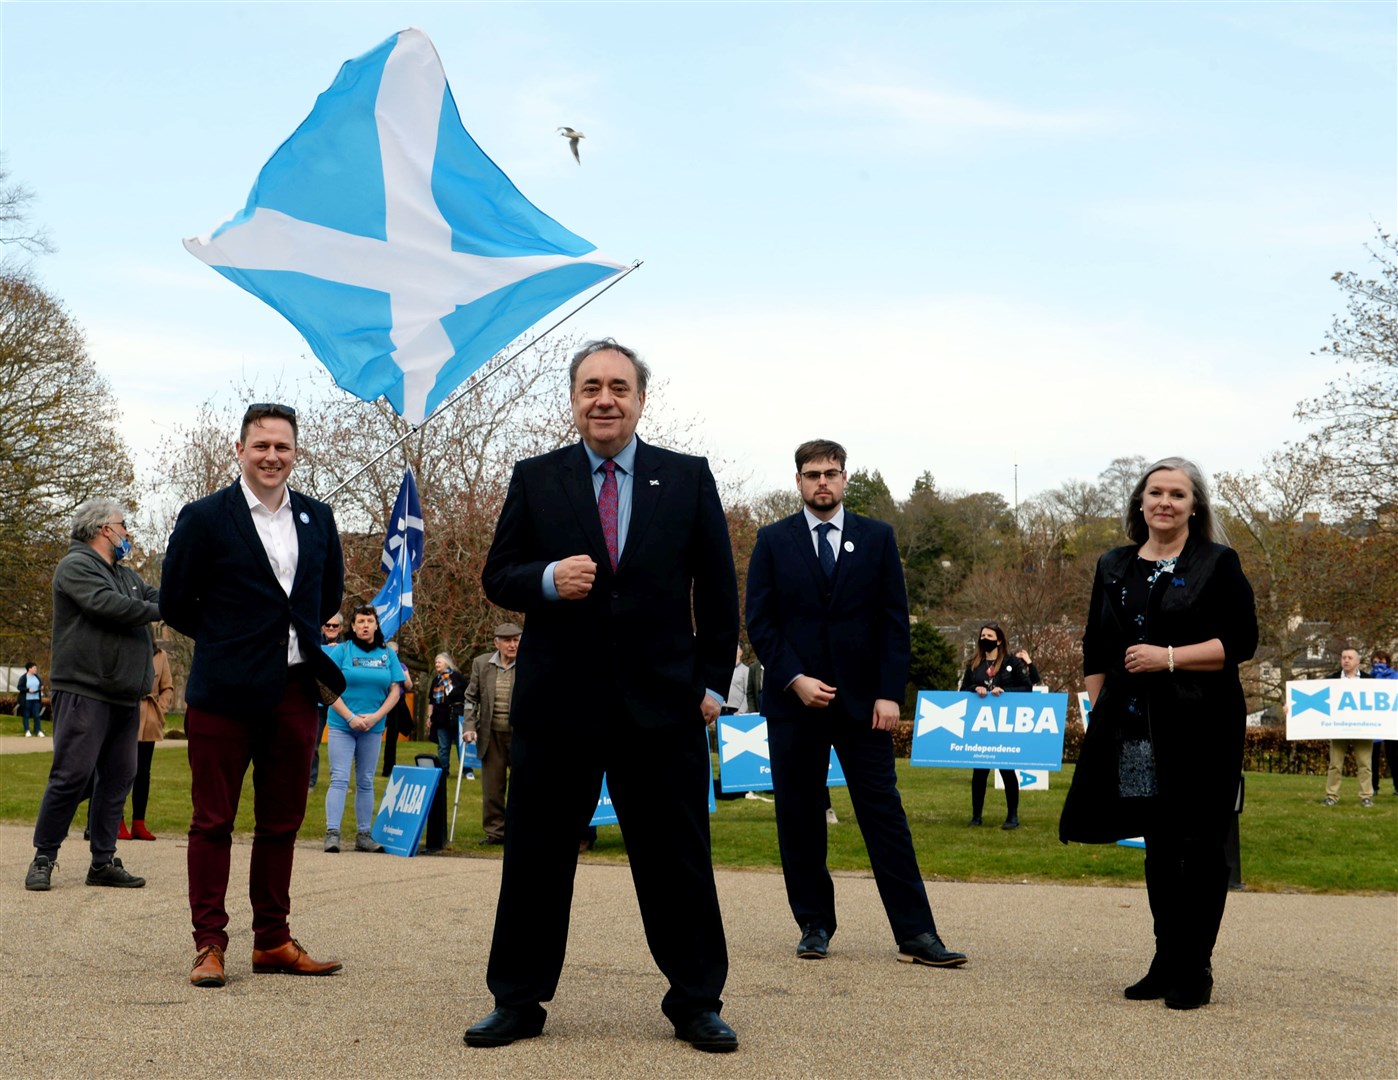 Alex Salmond launches the Alba Party's Highlands & Islands Campaign, pictured (left to right) Kirk Torrance, Alex Salmond, Josh Robertson and Judith Reid.